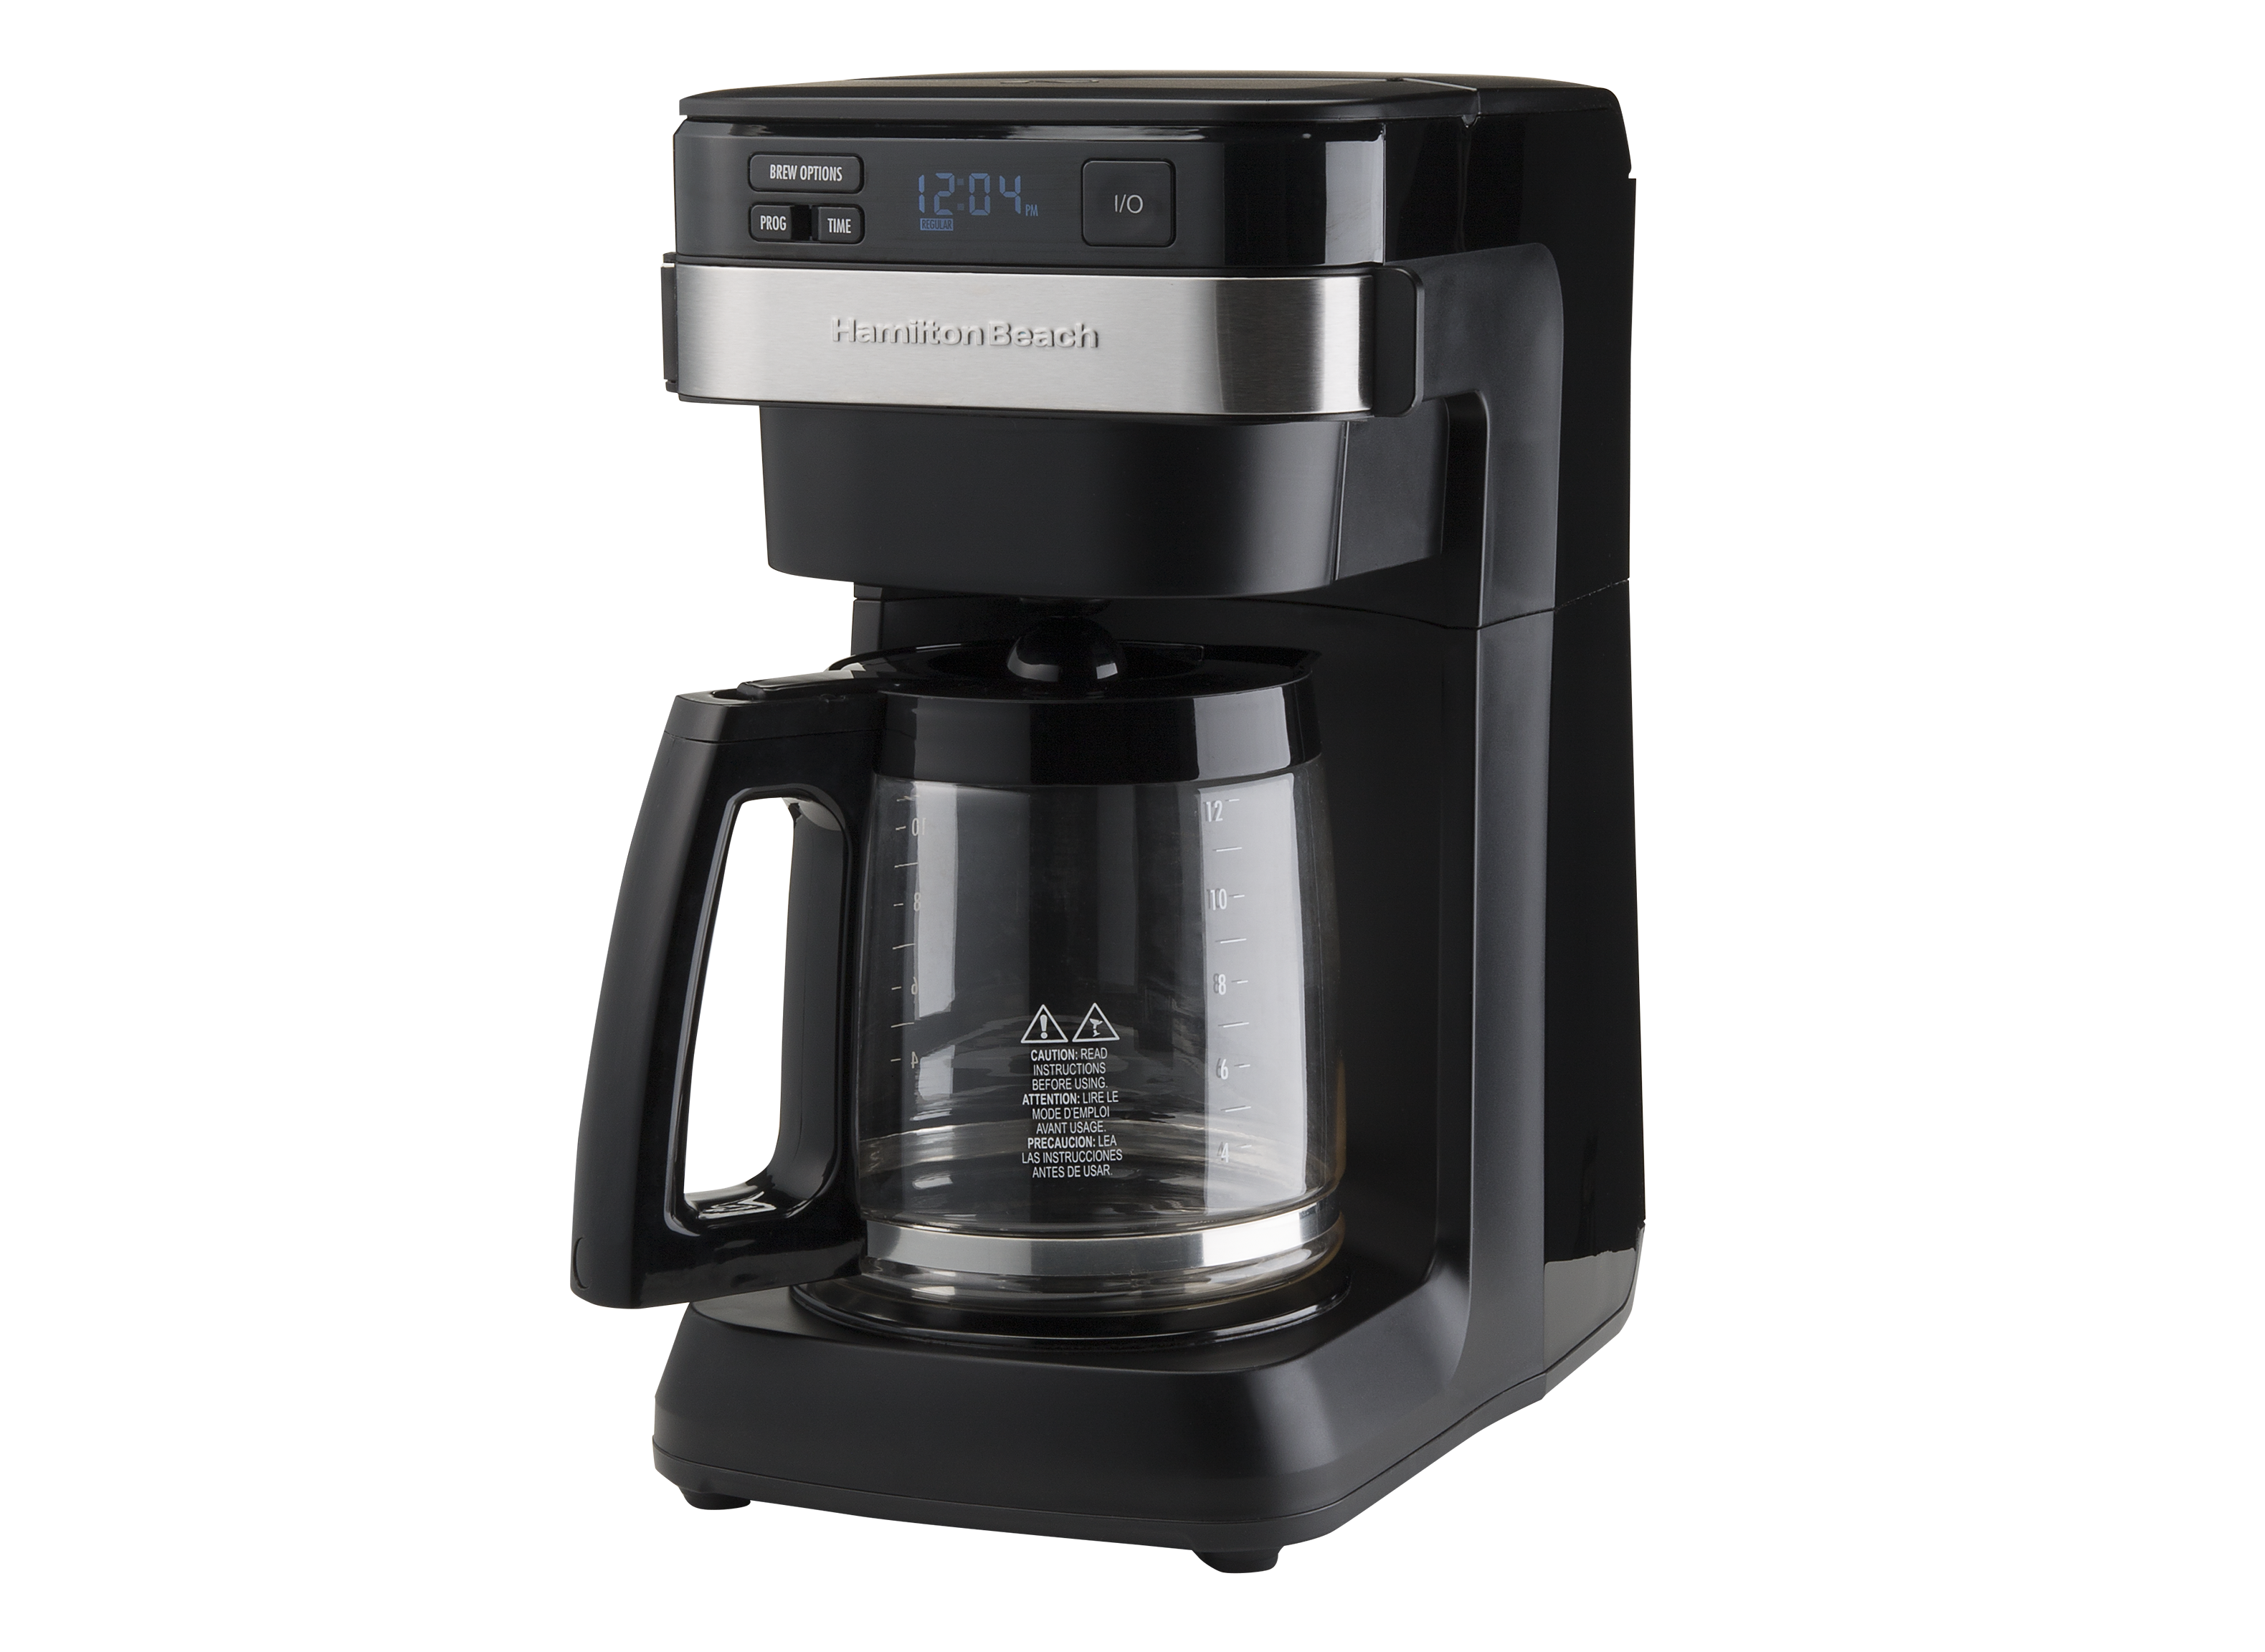 https://crdms.images.consumerreports.org/prod/products/cr/models/386073-coffeemakers-hamiltonbeach-universaldesign46300.png